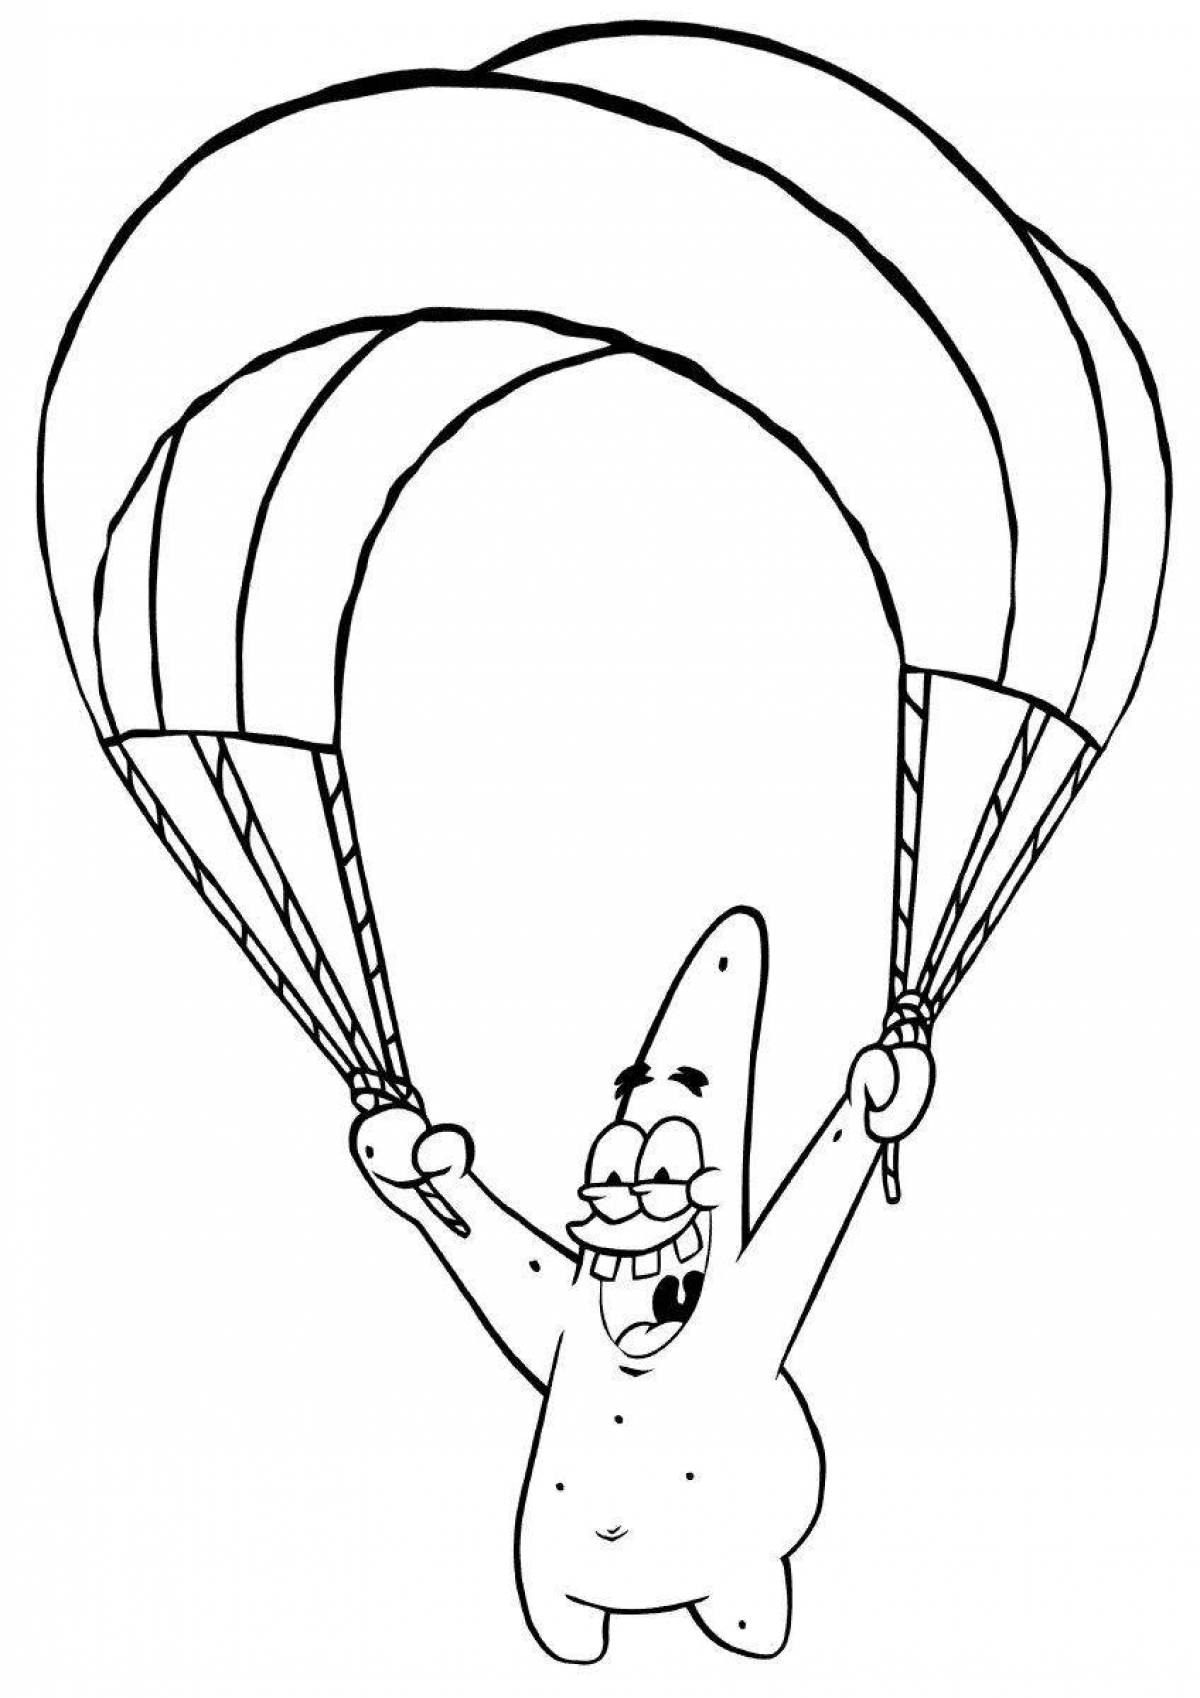 Colorful parachute coloring page for little ones